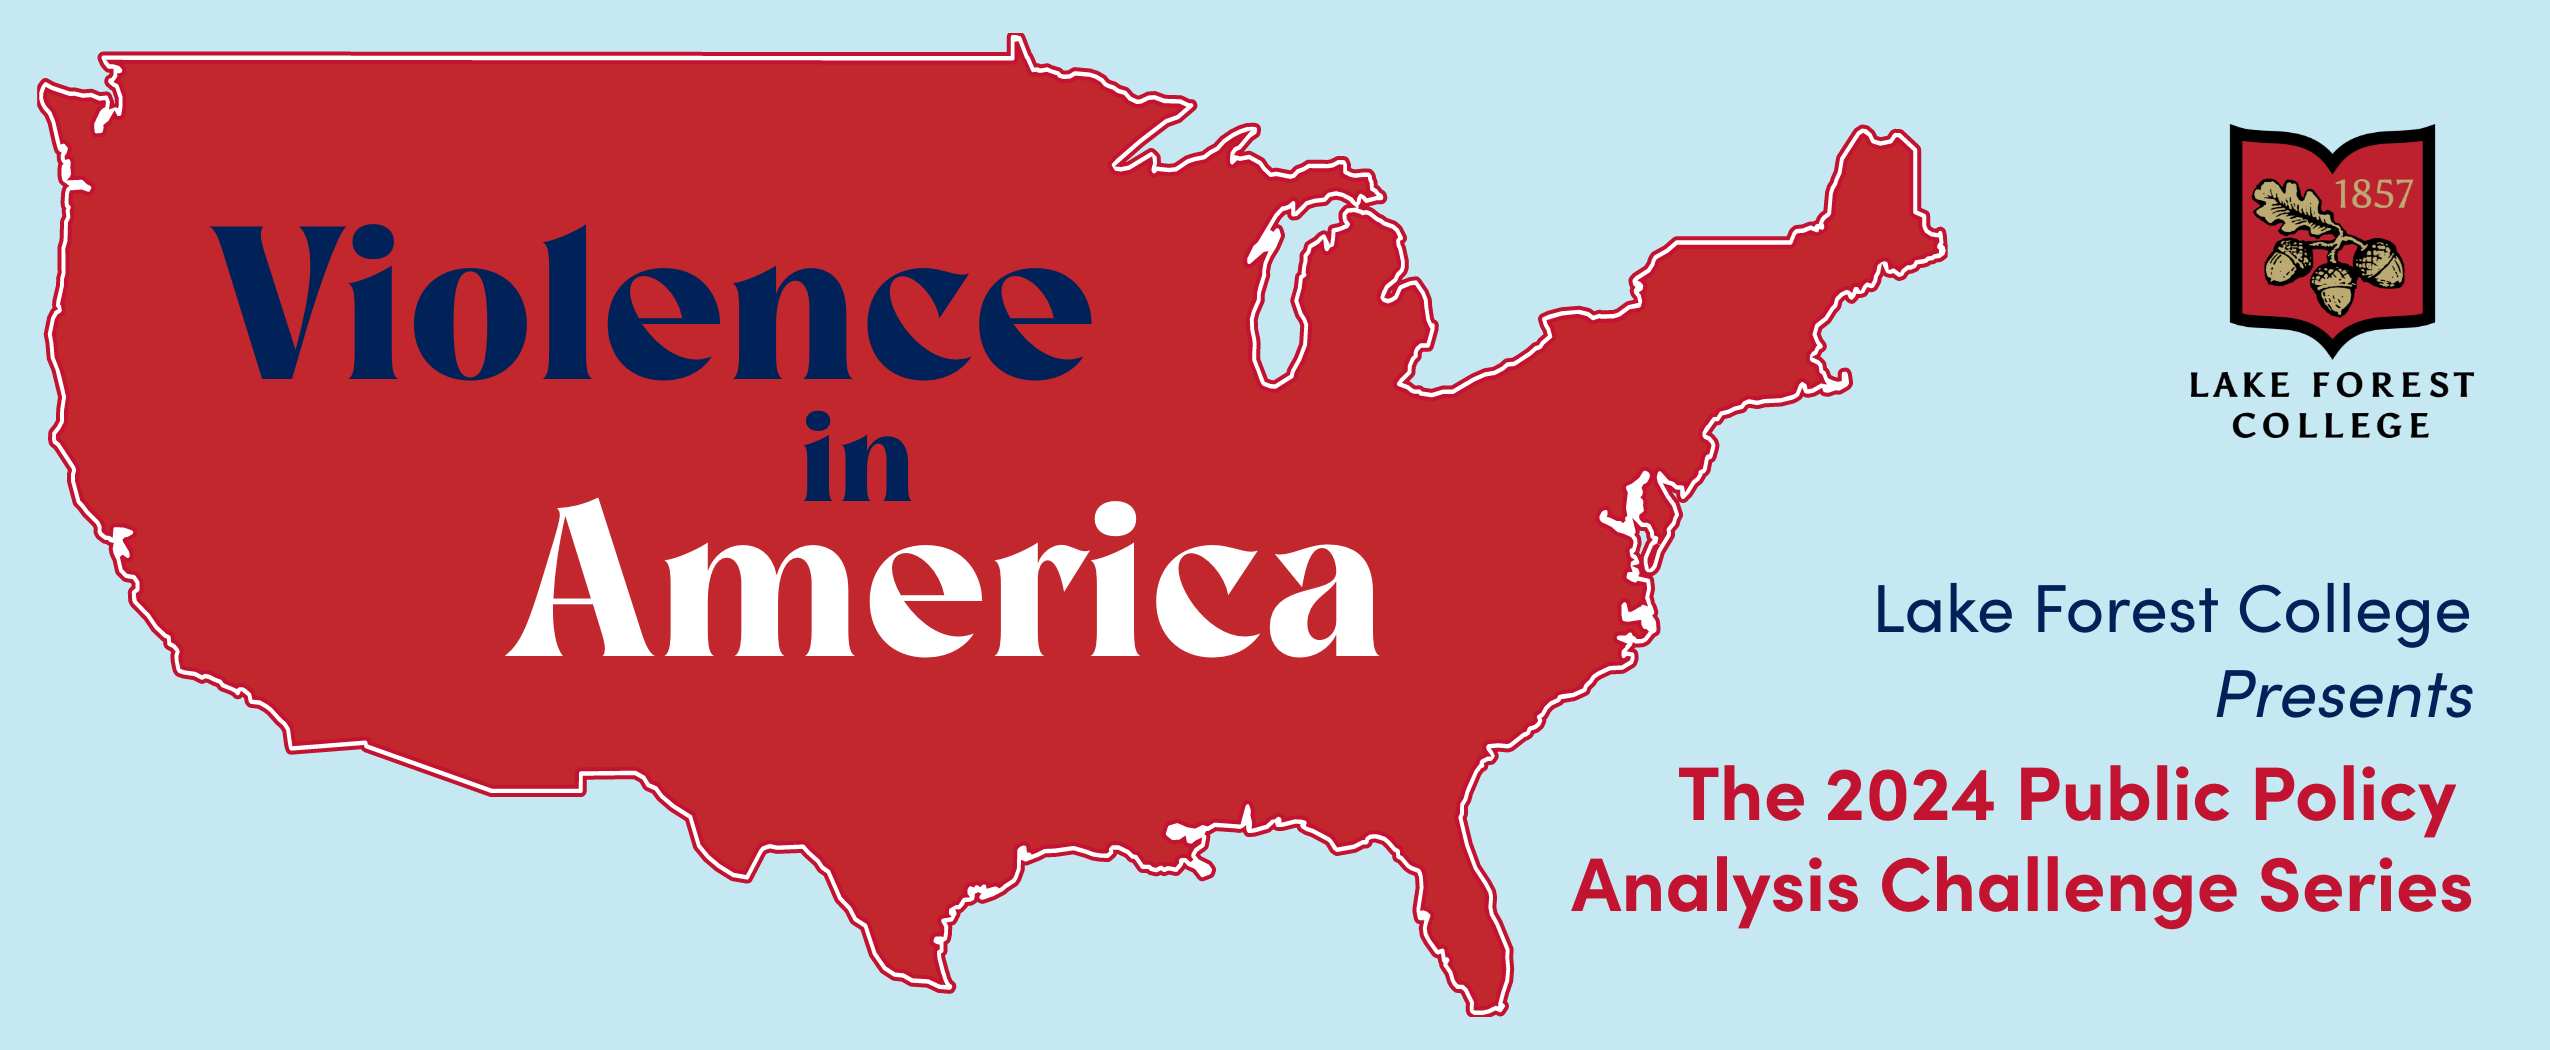 Violence In America 2024 Public Policy Analysis Chal;lenge